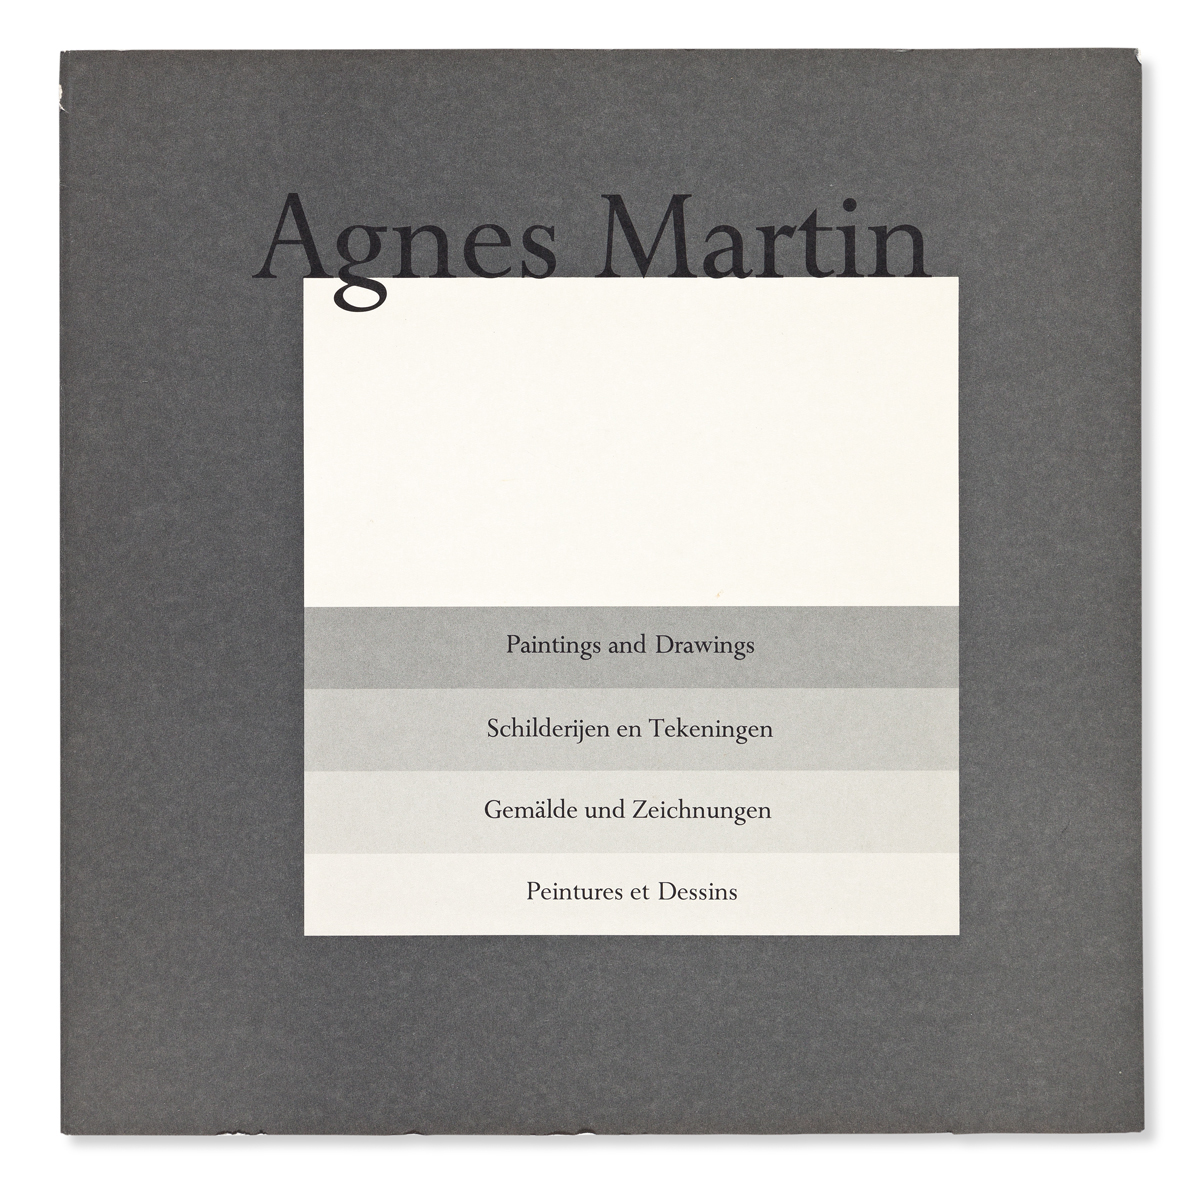 MARTIN, AGNES. Paintings and Drawings 1974-1990.